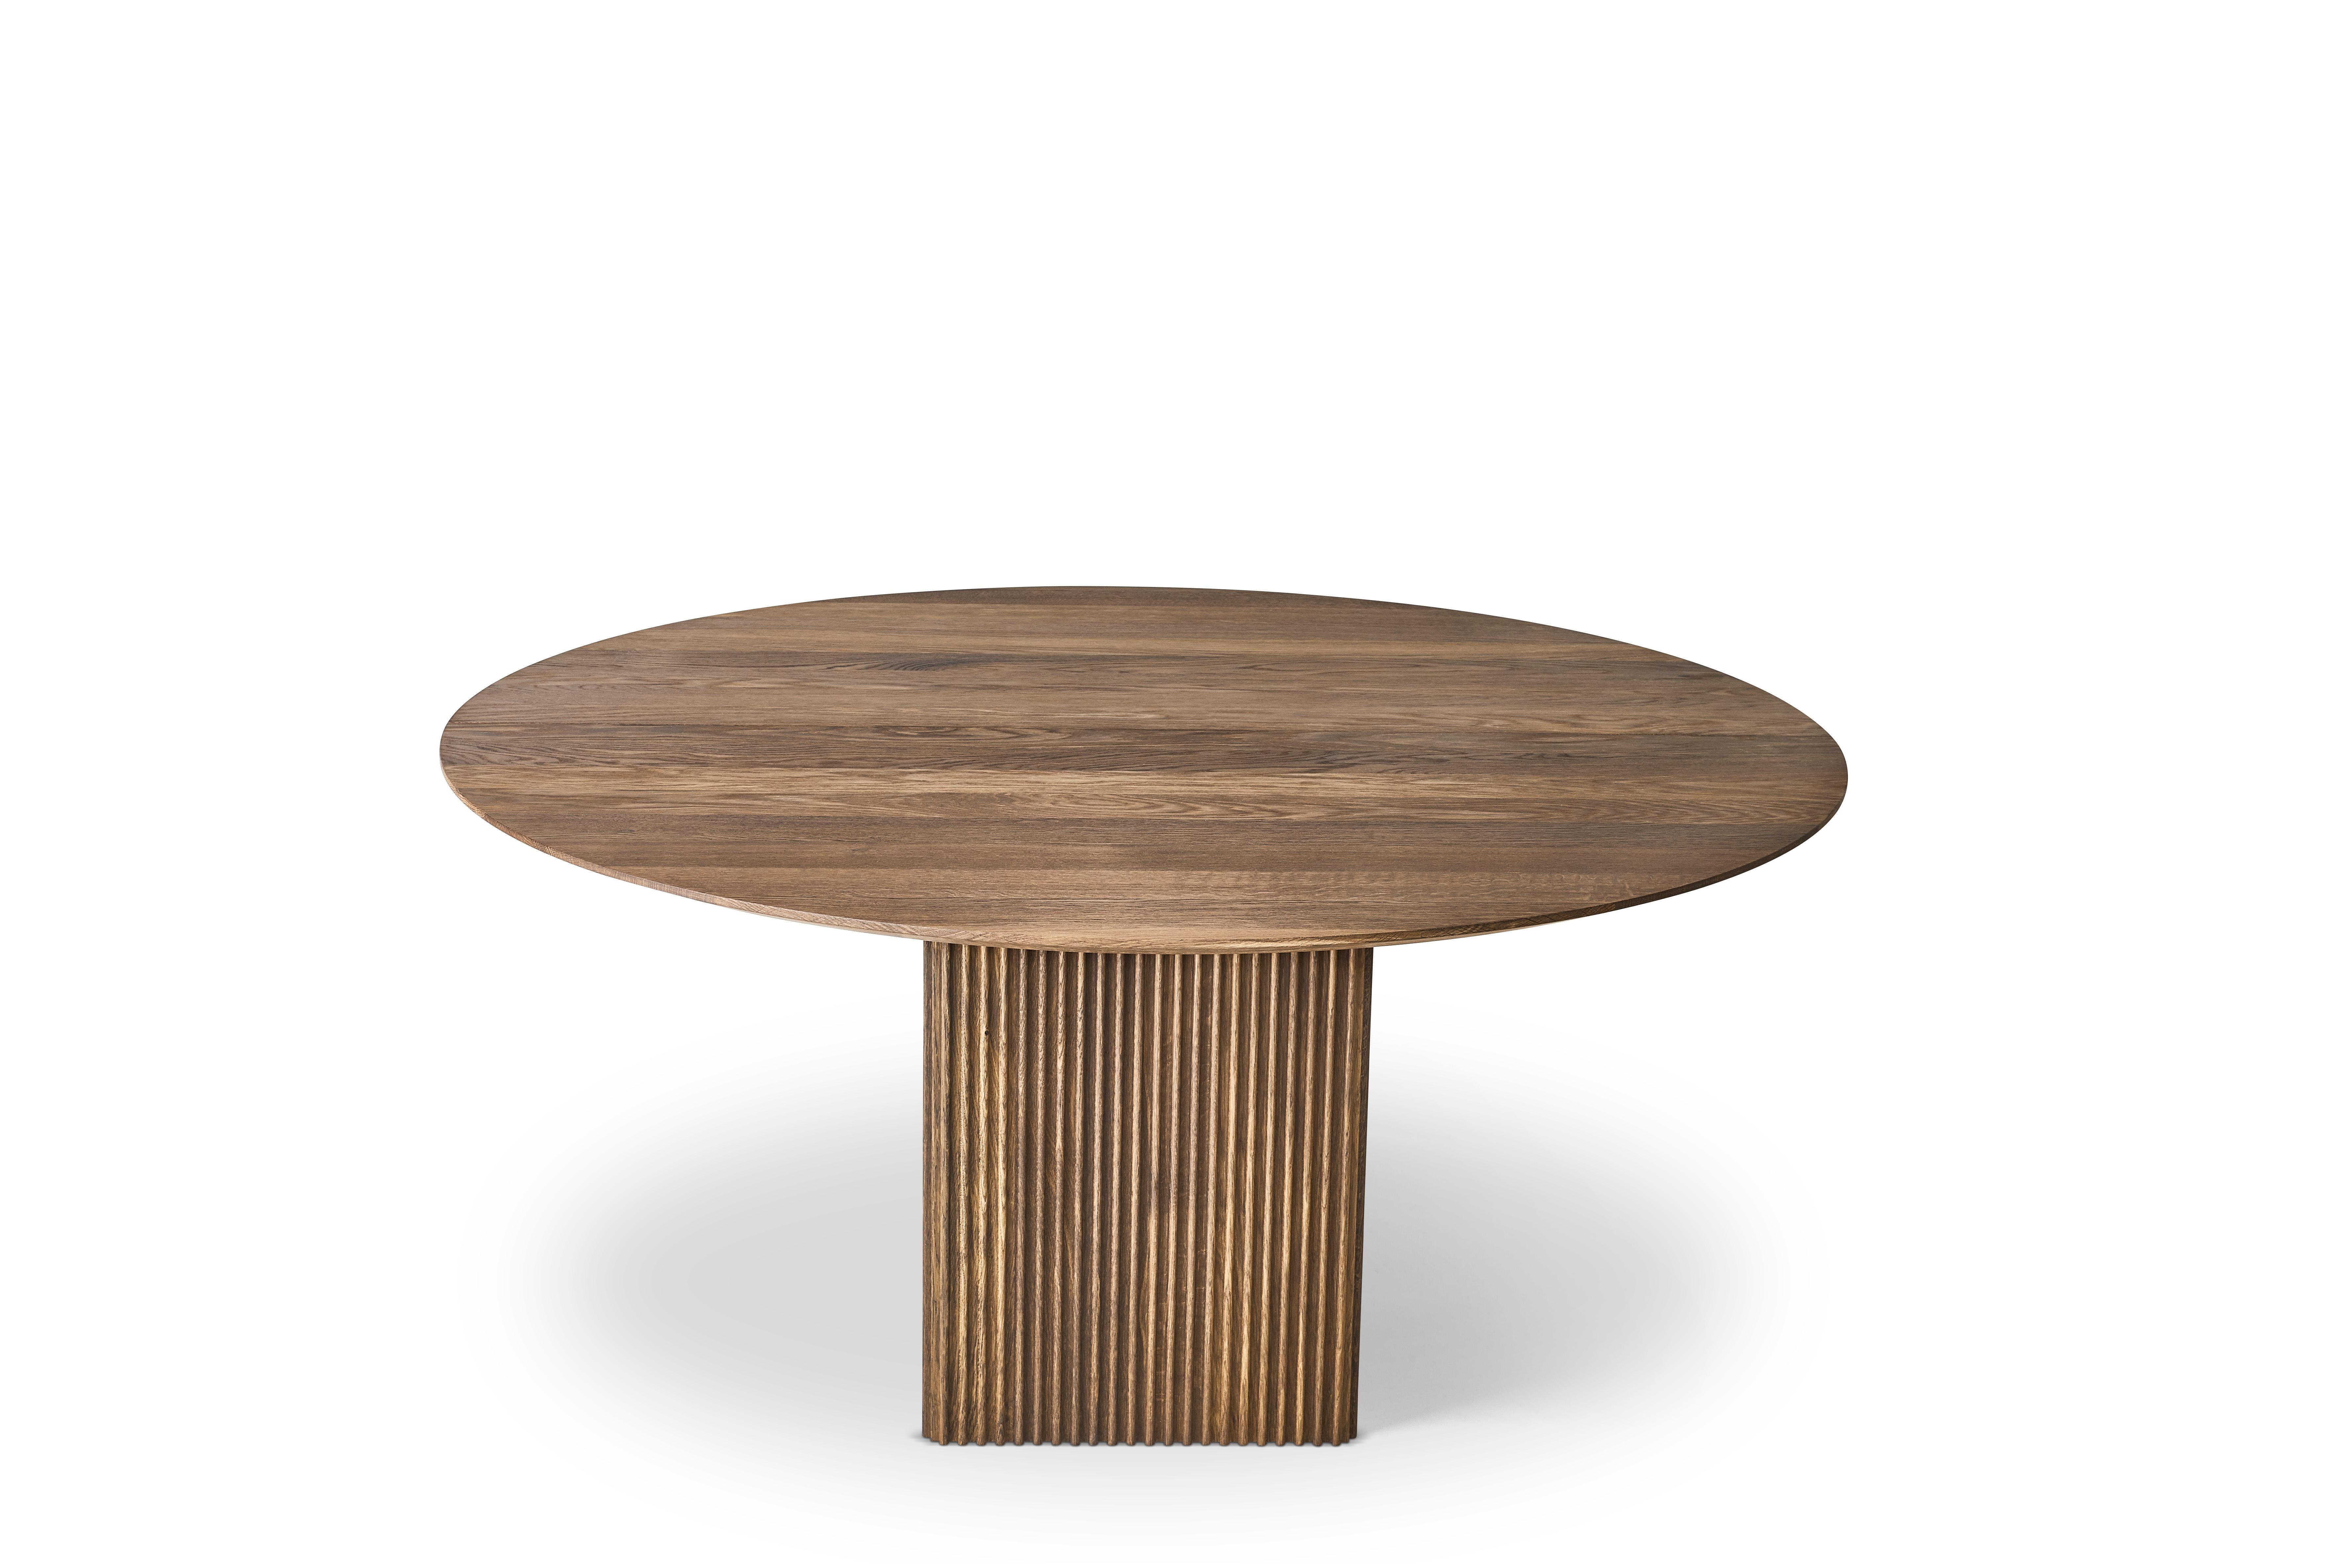 TEN Round Table 140 by DK3 
Solid wood tabletop and legs

Table height: 72 or 74 cm
Base dimension (depending on the tabletop size):
– 42 x 42 cm
– 47 x 47 cm

Tabletop diameter: 140 cm
Tabletop thickness: 3 cm

Wood :
– Oak
– Smoked